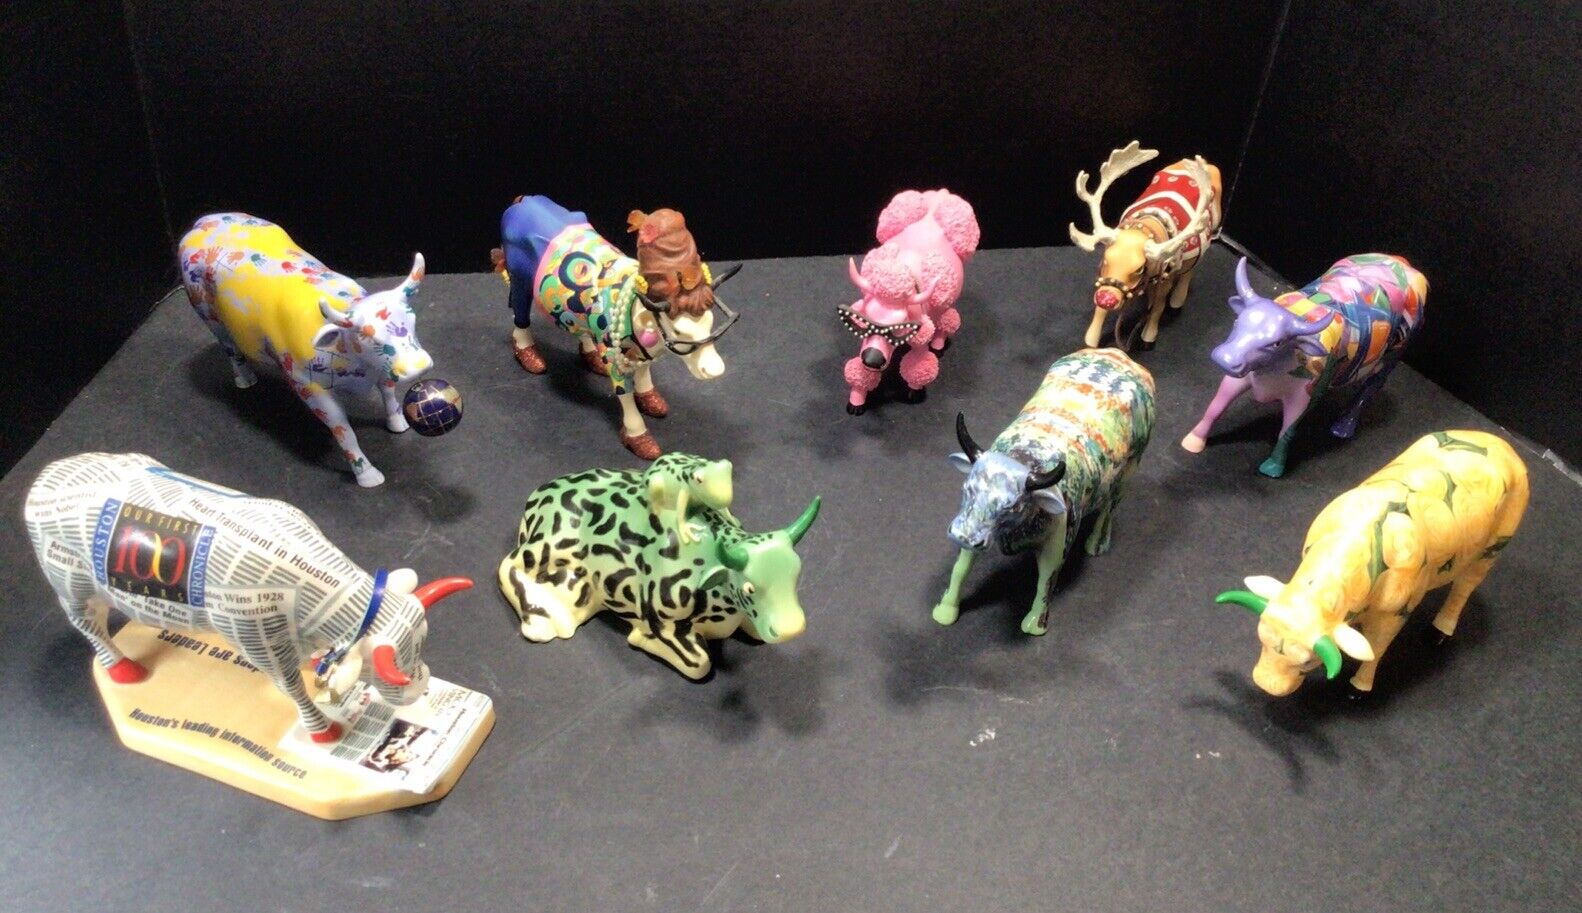 Herd of 9 Cow Parade Collectible Figurines - Refer To Description For Details